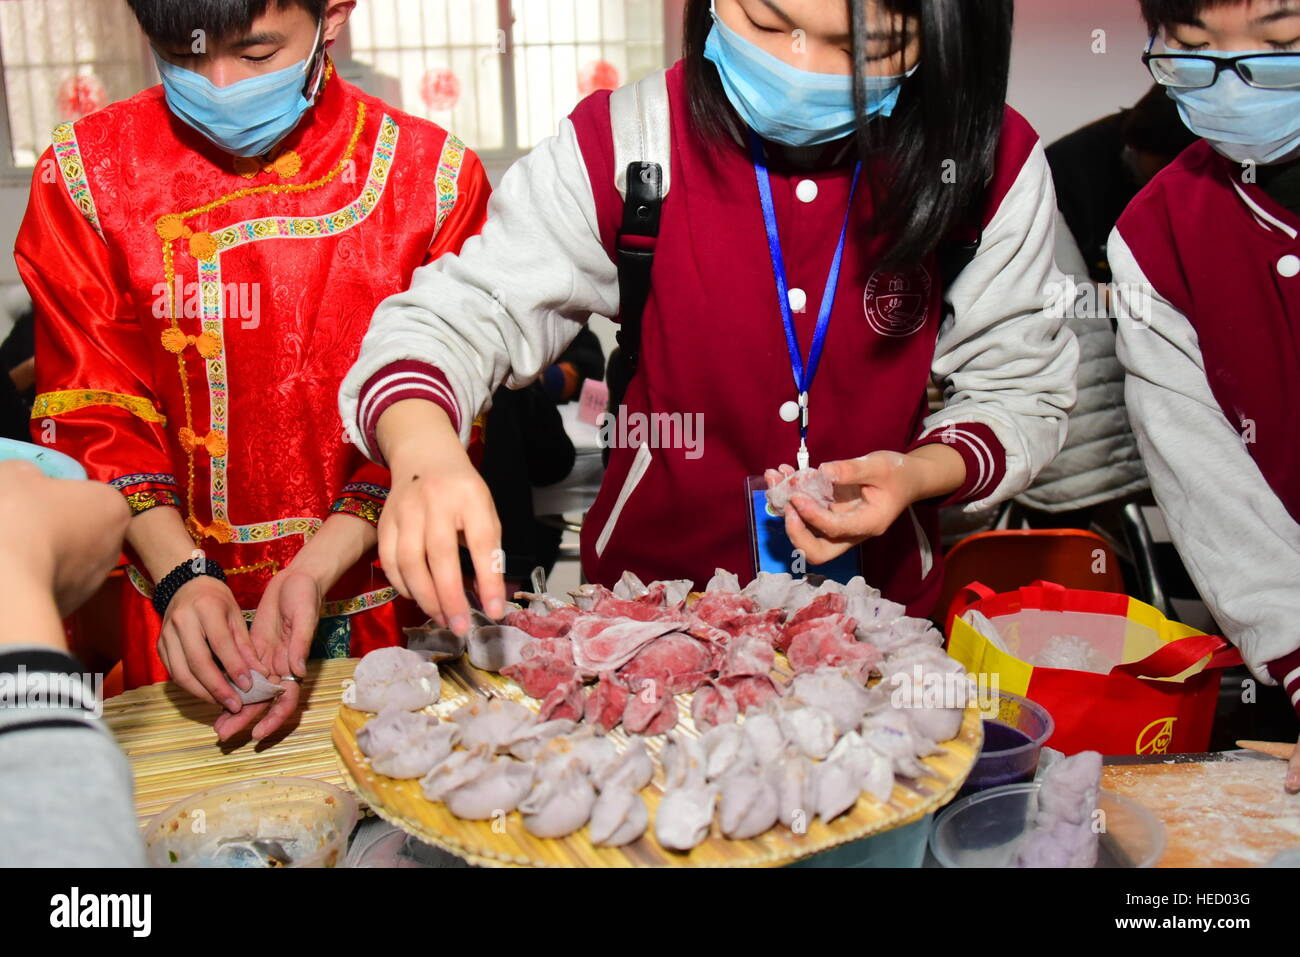 Zhengzhou, Zhengzhou, China. 20th Dec, 2016. Zhengzhou, CHINA-December 20 2016: (EDITORIAL USE ONLY. CHINA OUT) .Students make thousands of dumplings for street cleaners at Henan University of Agriculture in Zhengzhou, capital of central China's Henan Province, December 20th, 2016, marking the solar term 'Winter Solstice'. The dumplings were laid in a pattern of the Chinese character 'Fu' which means good luck. The traditional Chinese lunar calendar divides the year into 24 solar terms. Winter Solstice, the 22nd solar term of the year, begins this year on Dec 21 and ends on Jan 4. On the Stock Photo